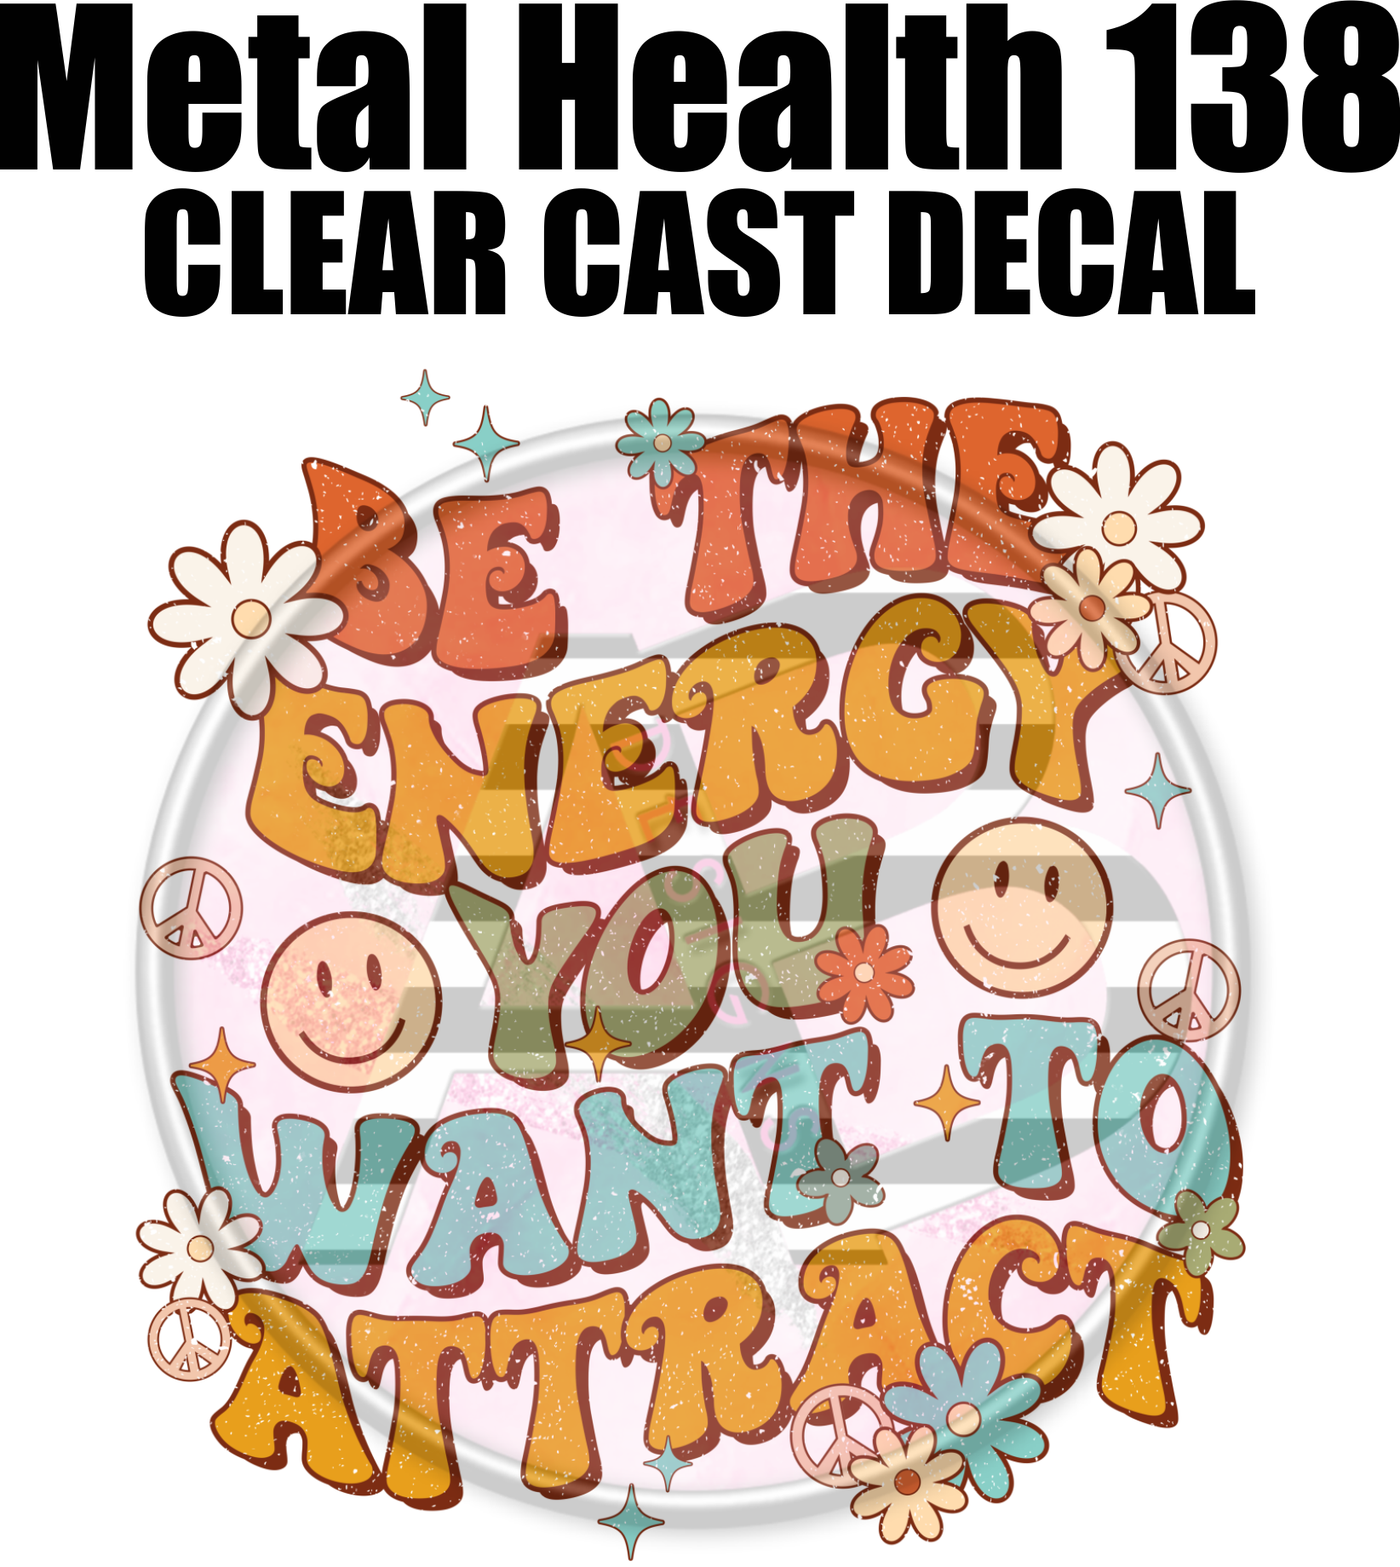 Mental Health 138 - Clear Cast Decal-607